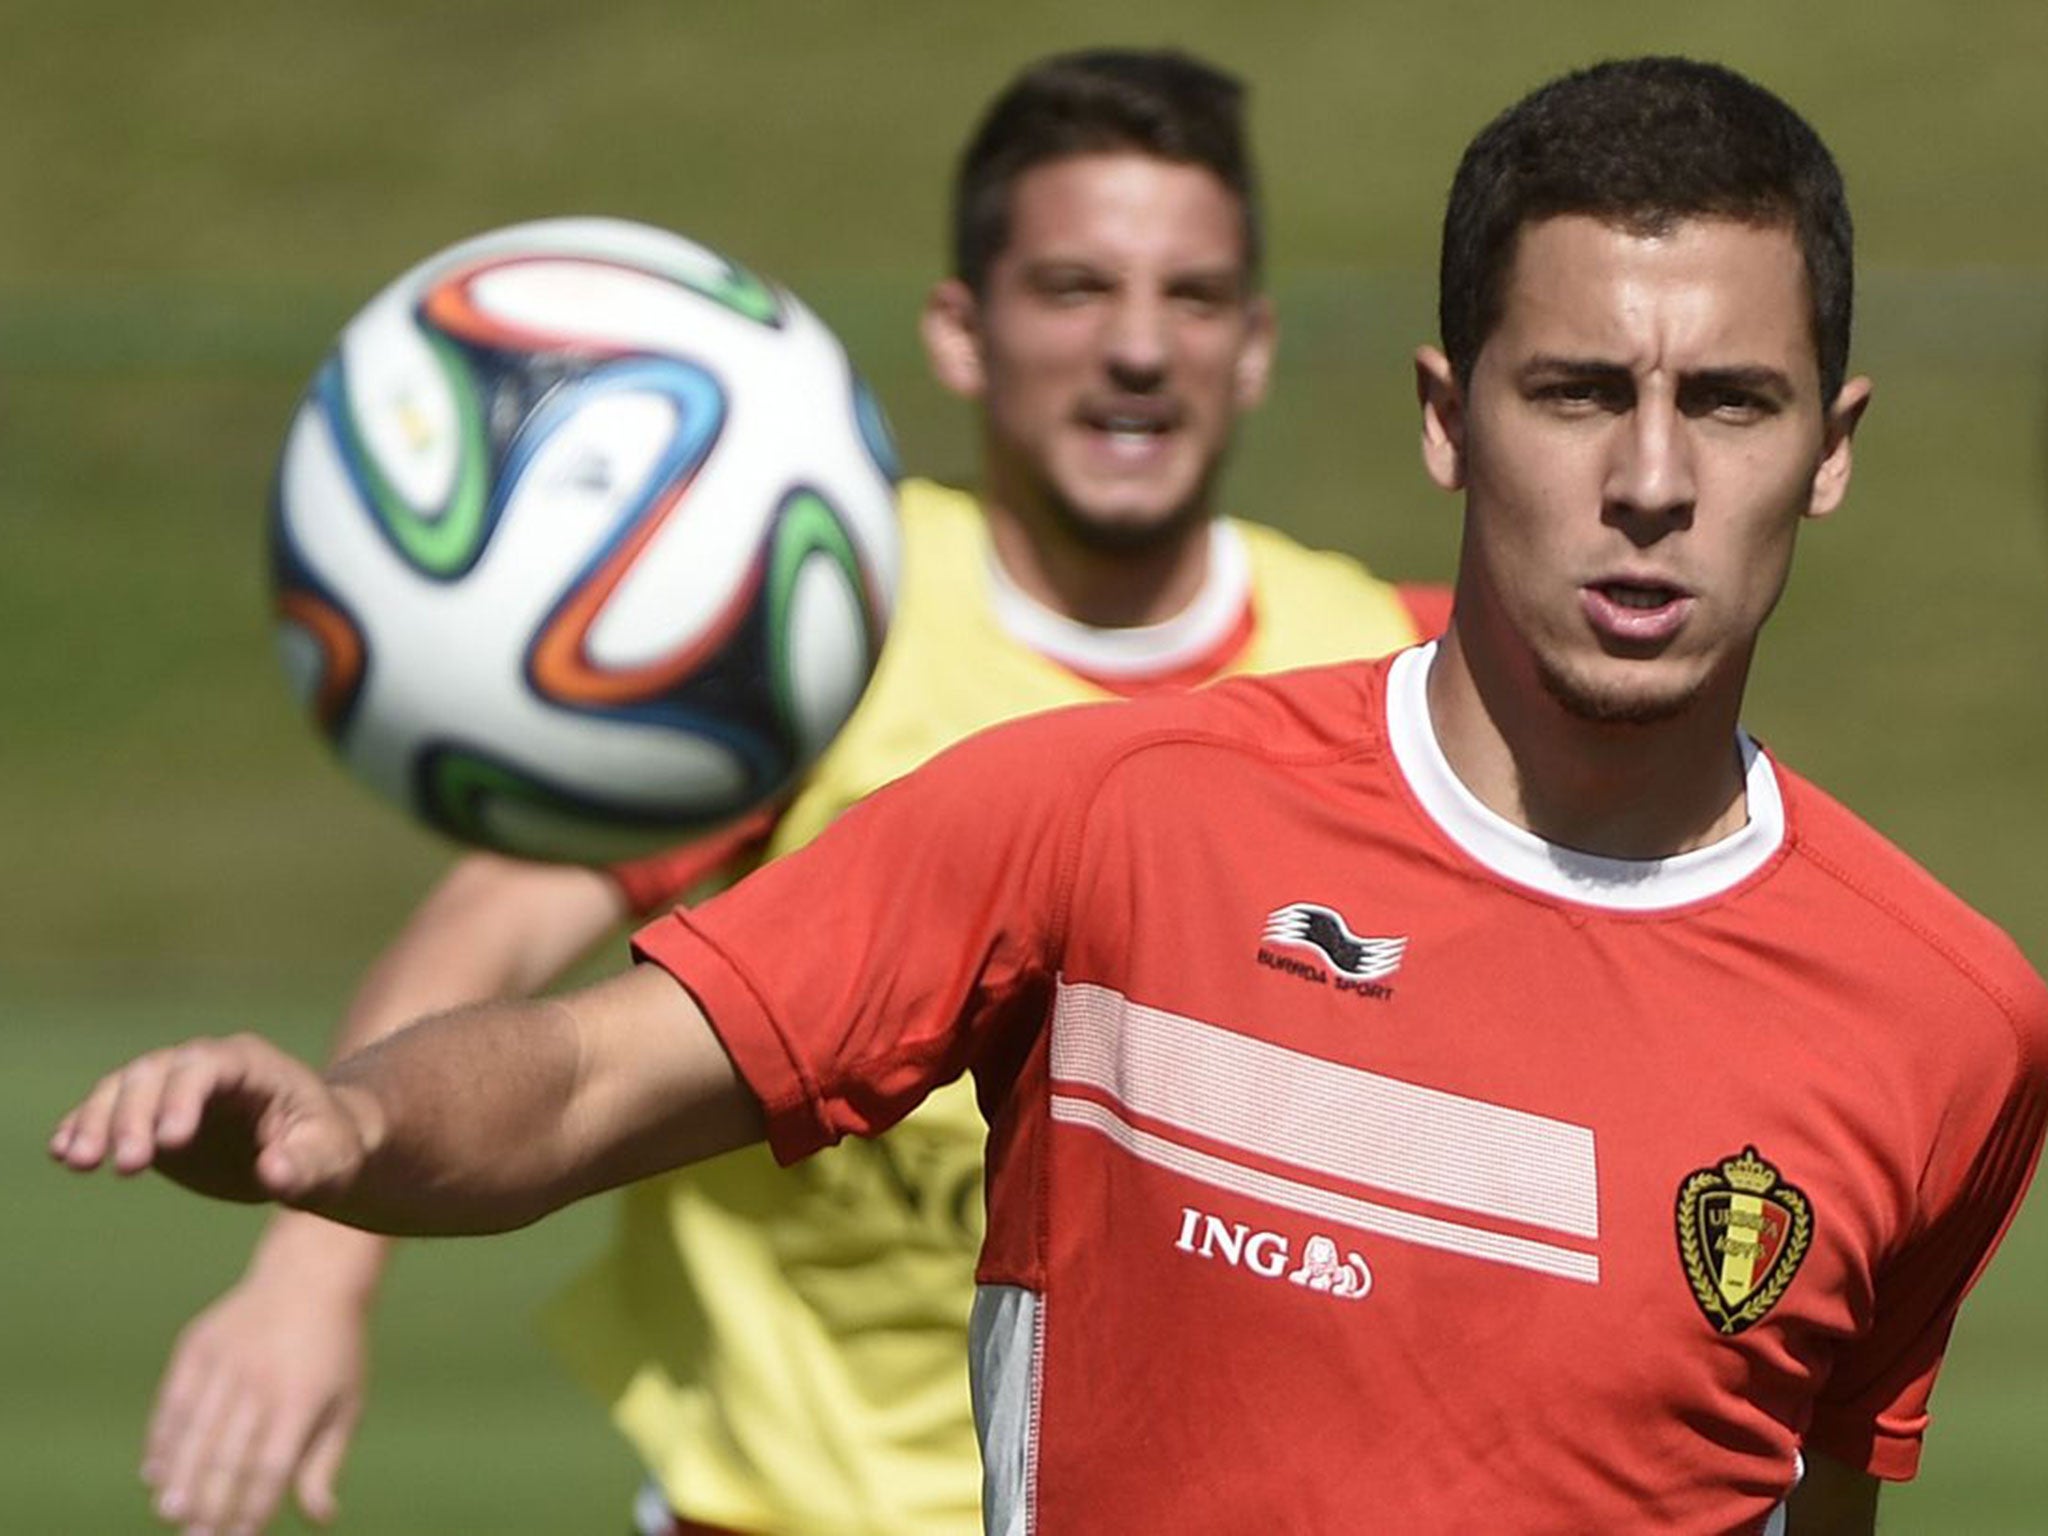 Chelsea midfielder Eden Hazard has left it late to turn on the style in both of Belgium’s matches so far at this World Cup